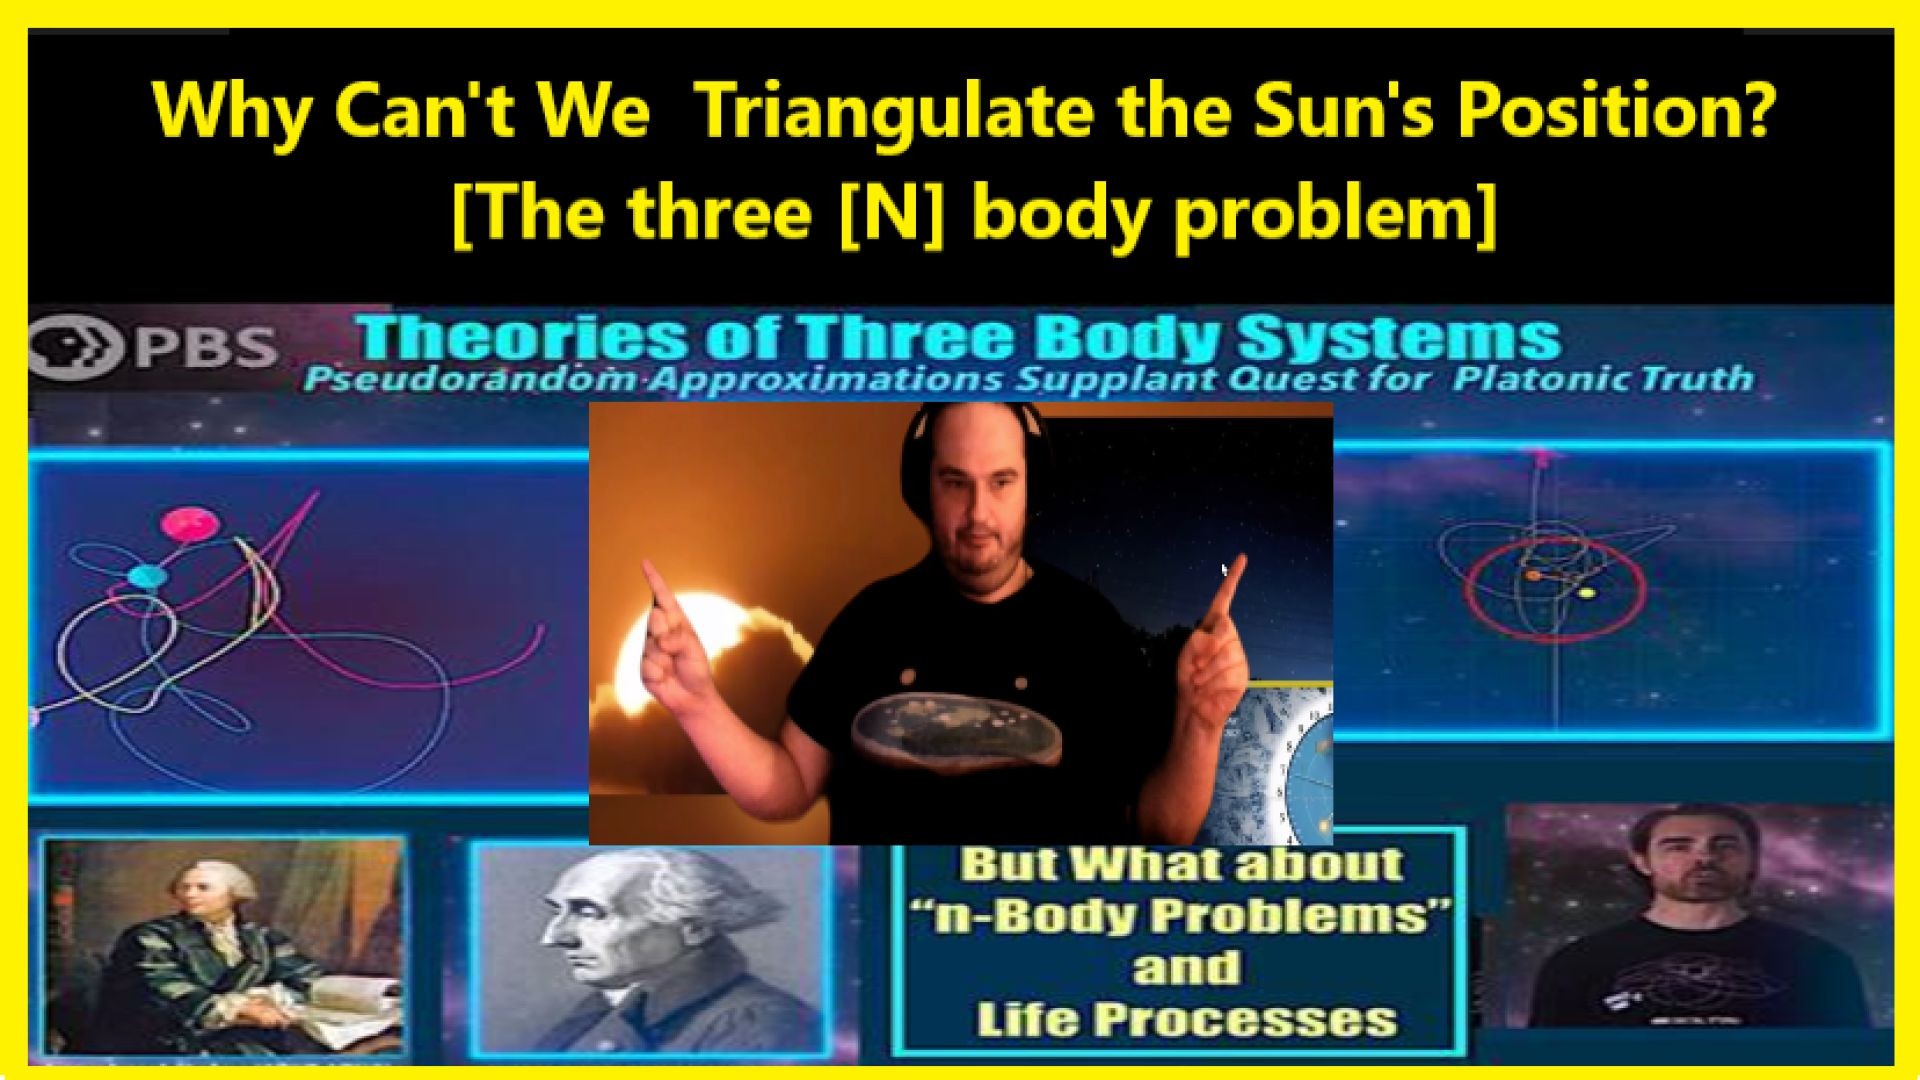 The three [N] body problem - Why Is it Impossible to Triangulate the Sun's Position?